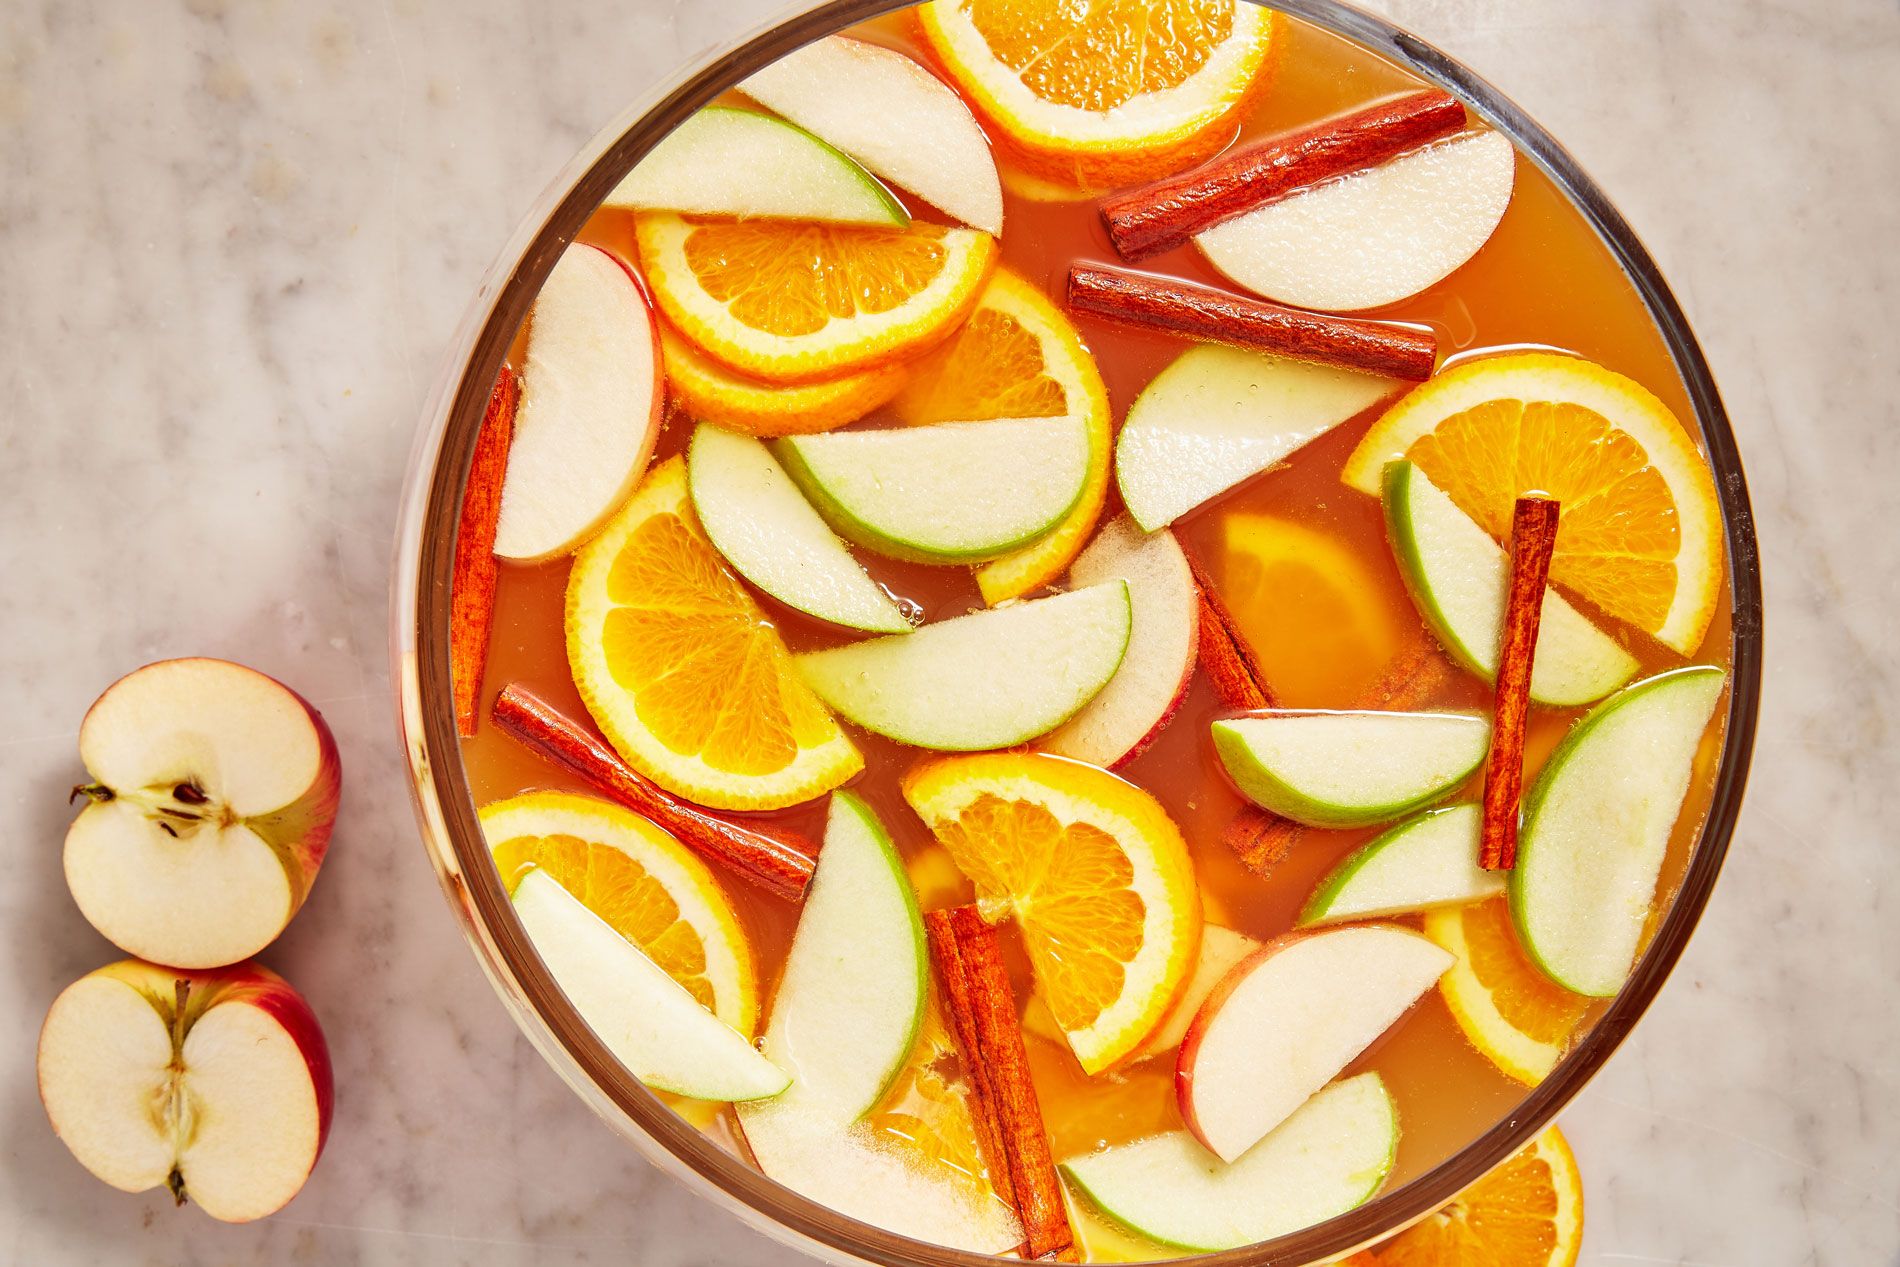 Best Harvest Punch Recipe - How to Make Harvest Punch